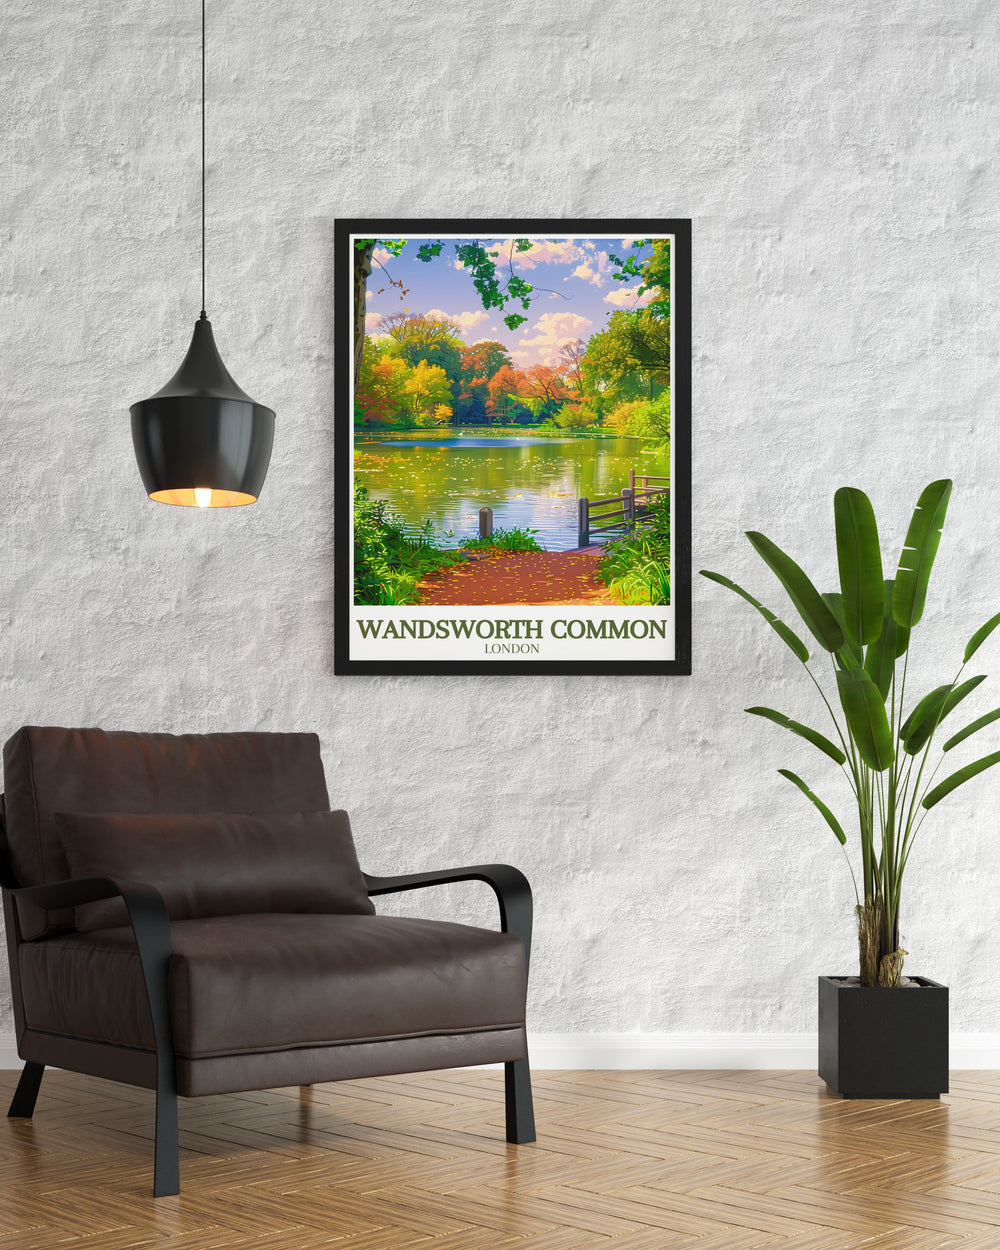 Capture the charm of Wandsworth Common with this retro railway print. This poster highlights the serene landscapes and historical landmarks of Wandsworth Park, making it a great addition to any collection of South London art.